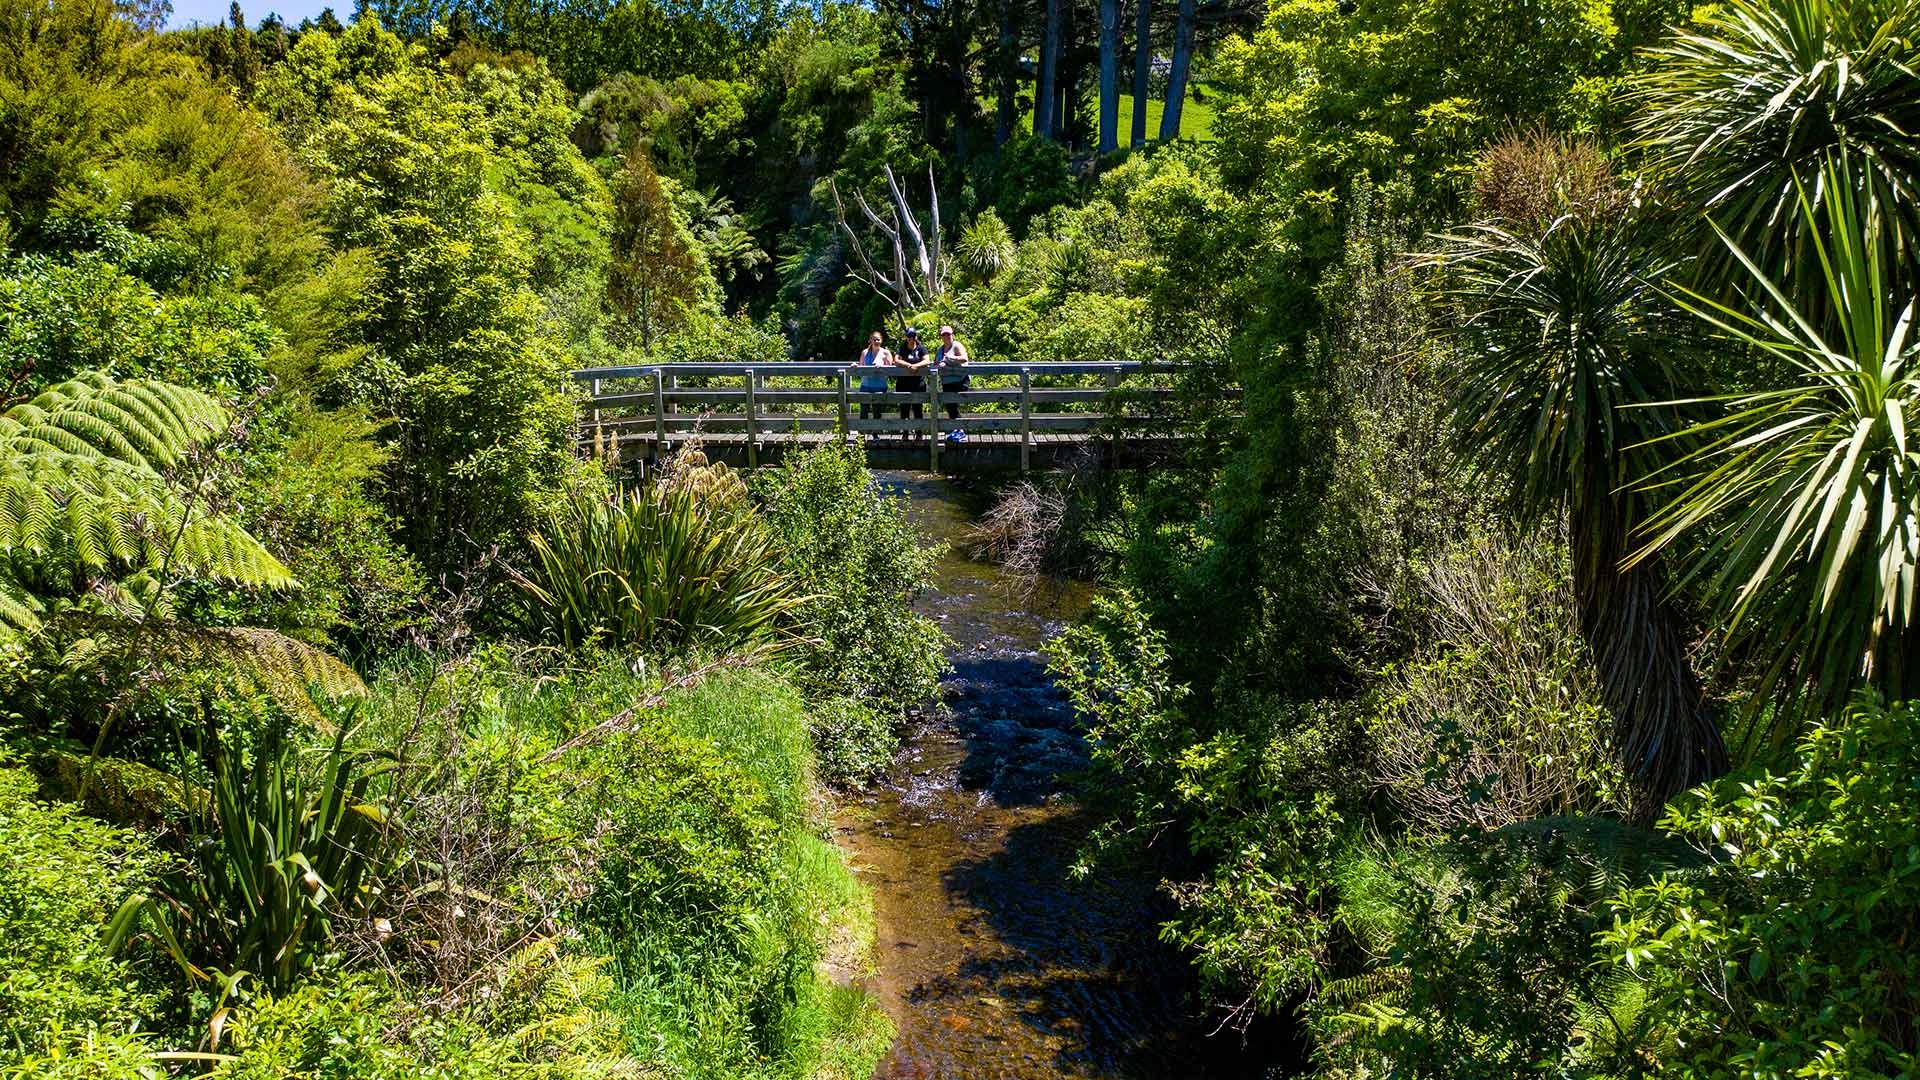 People on the bridge over a stream with native plants on both sides. 